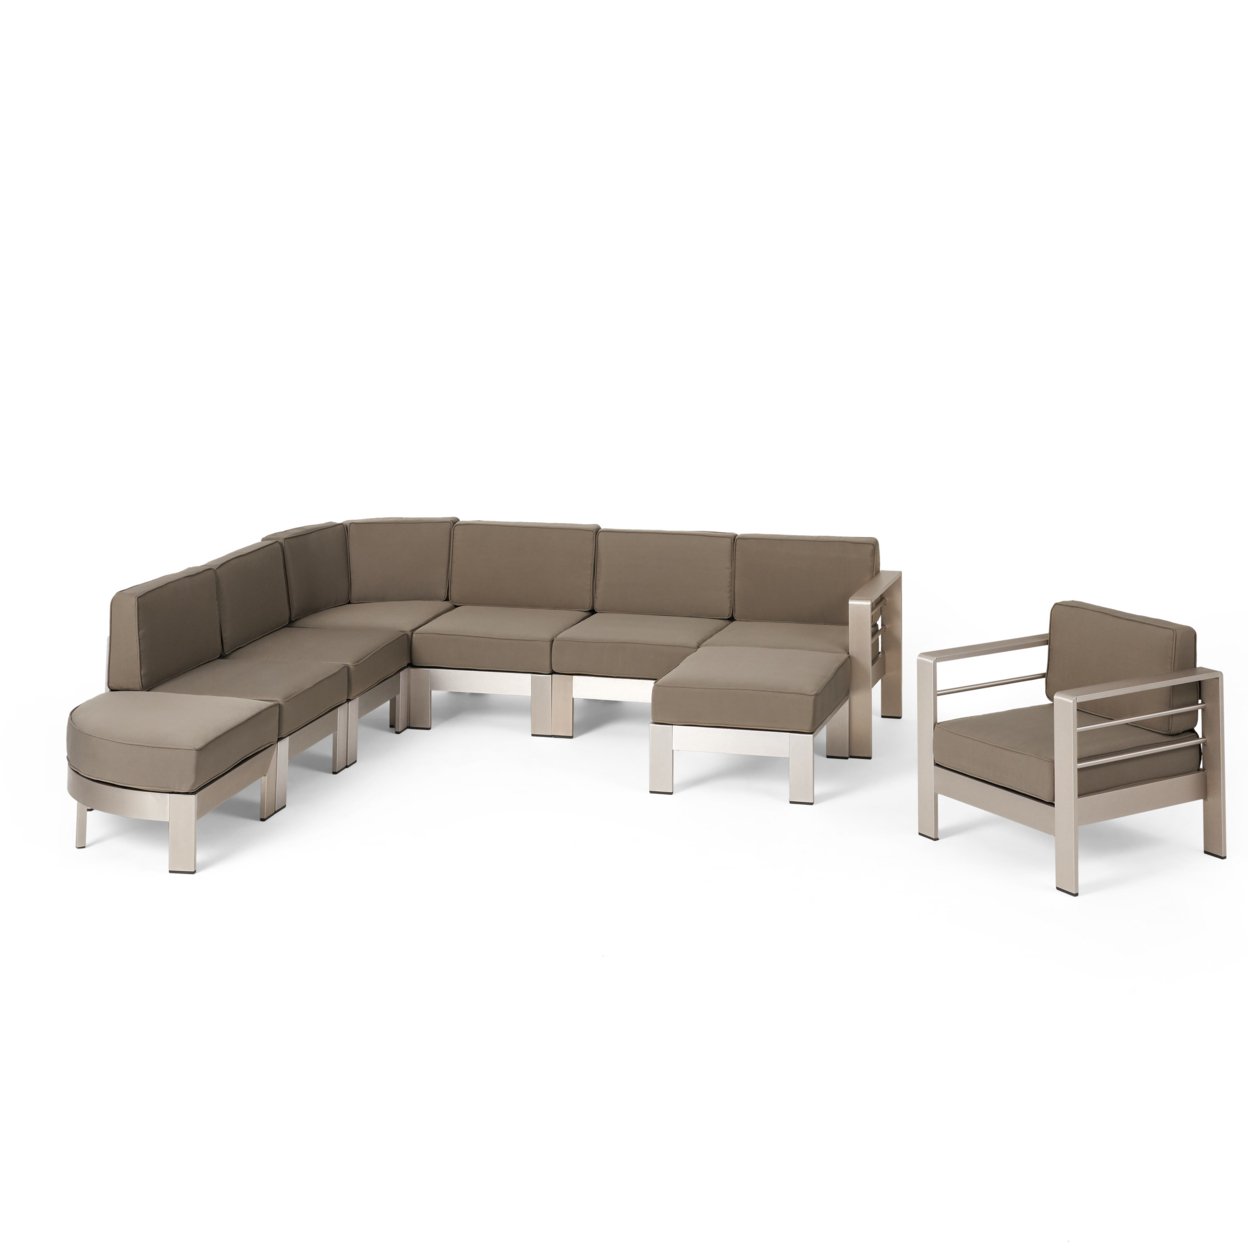 Cherie Half Round 6 Seater Sectional Set With Ottoman